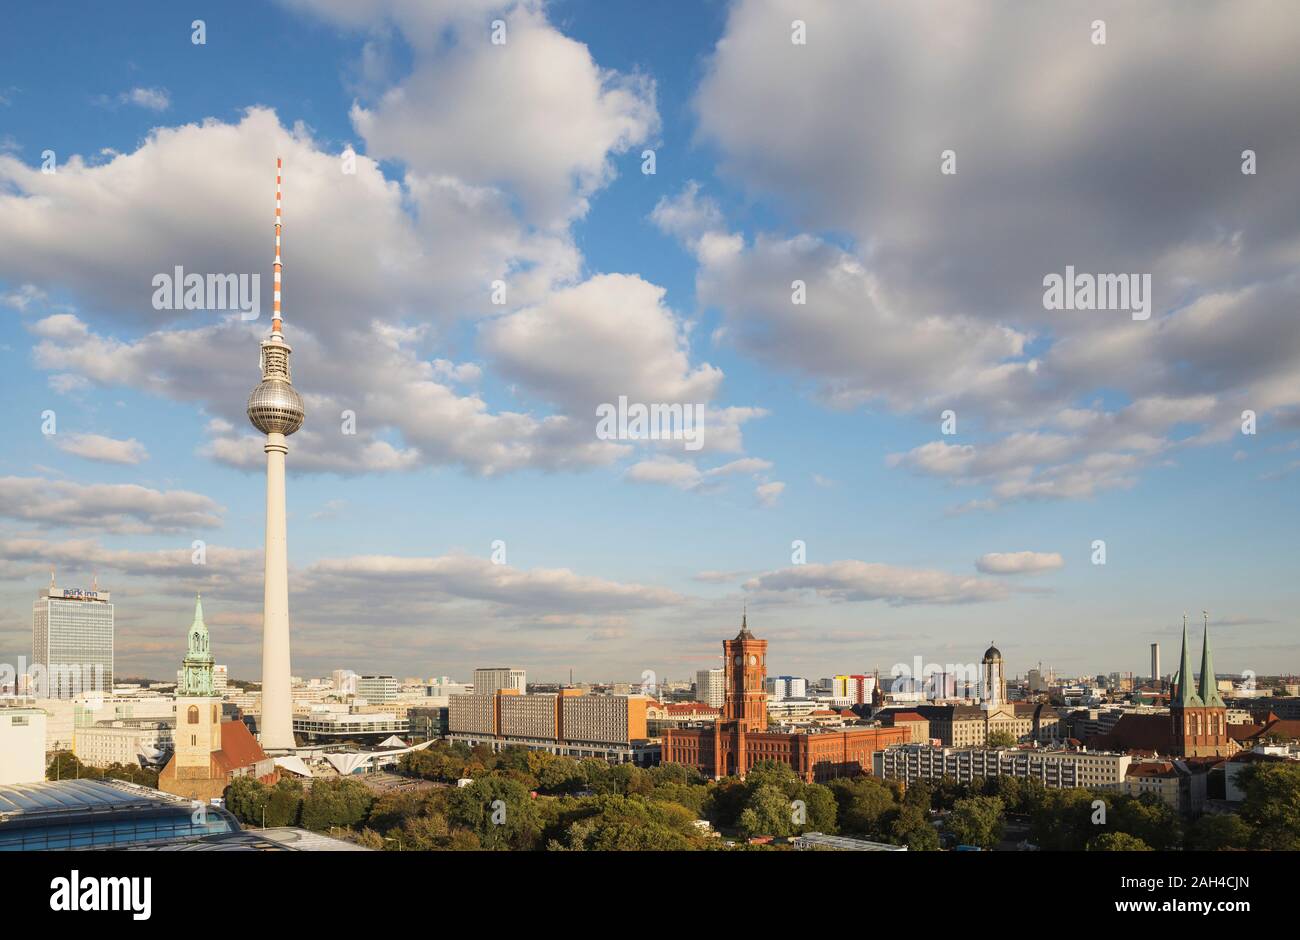 Germany, Berlin, Clouds over Berlin TV Tower and surrounding city buildings Stock Photo